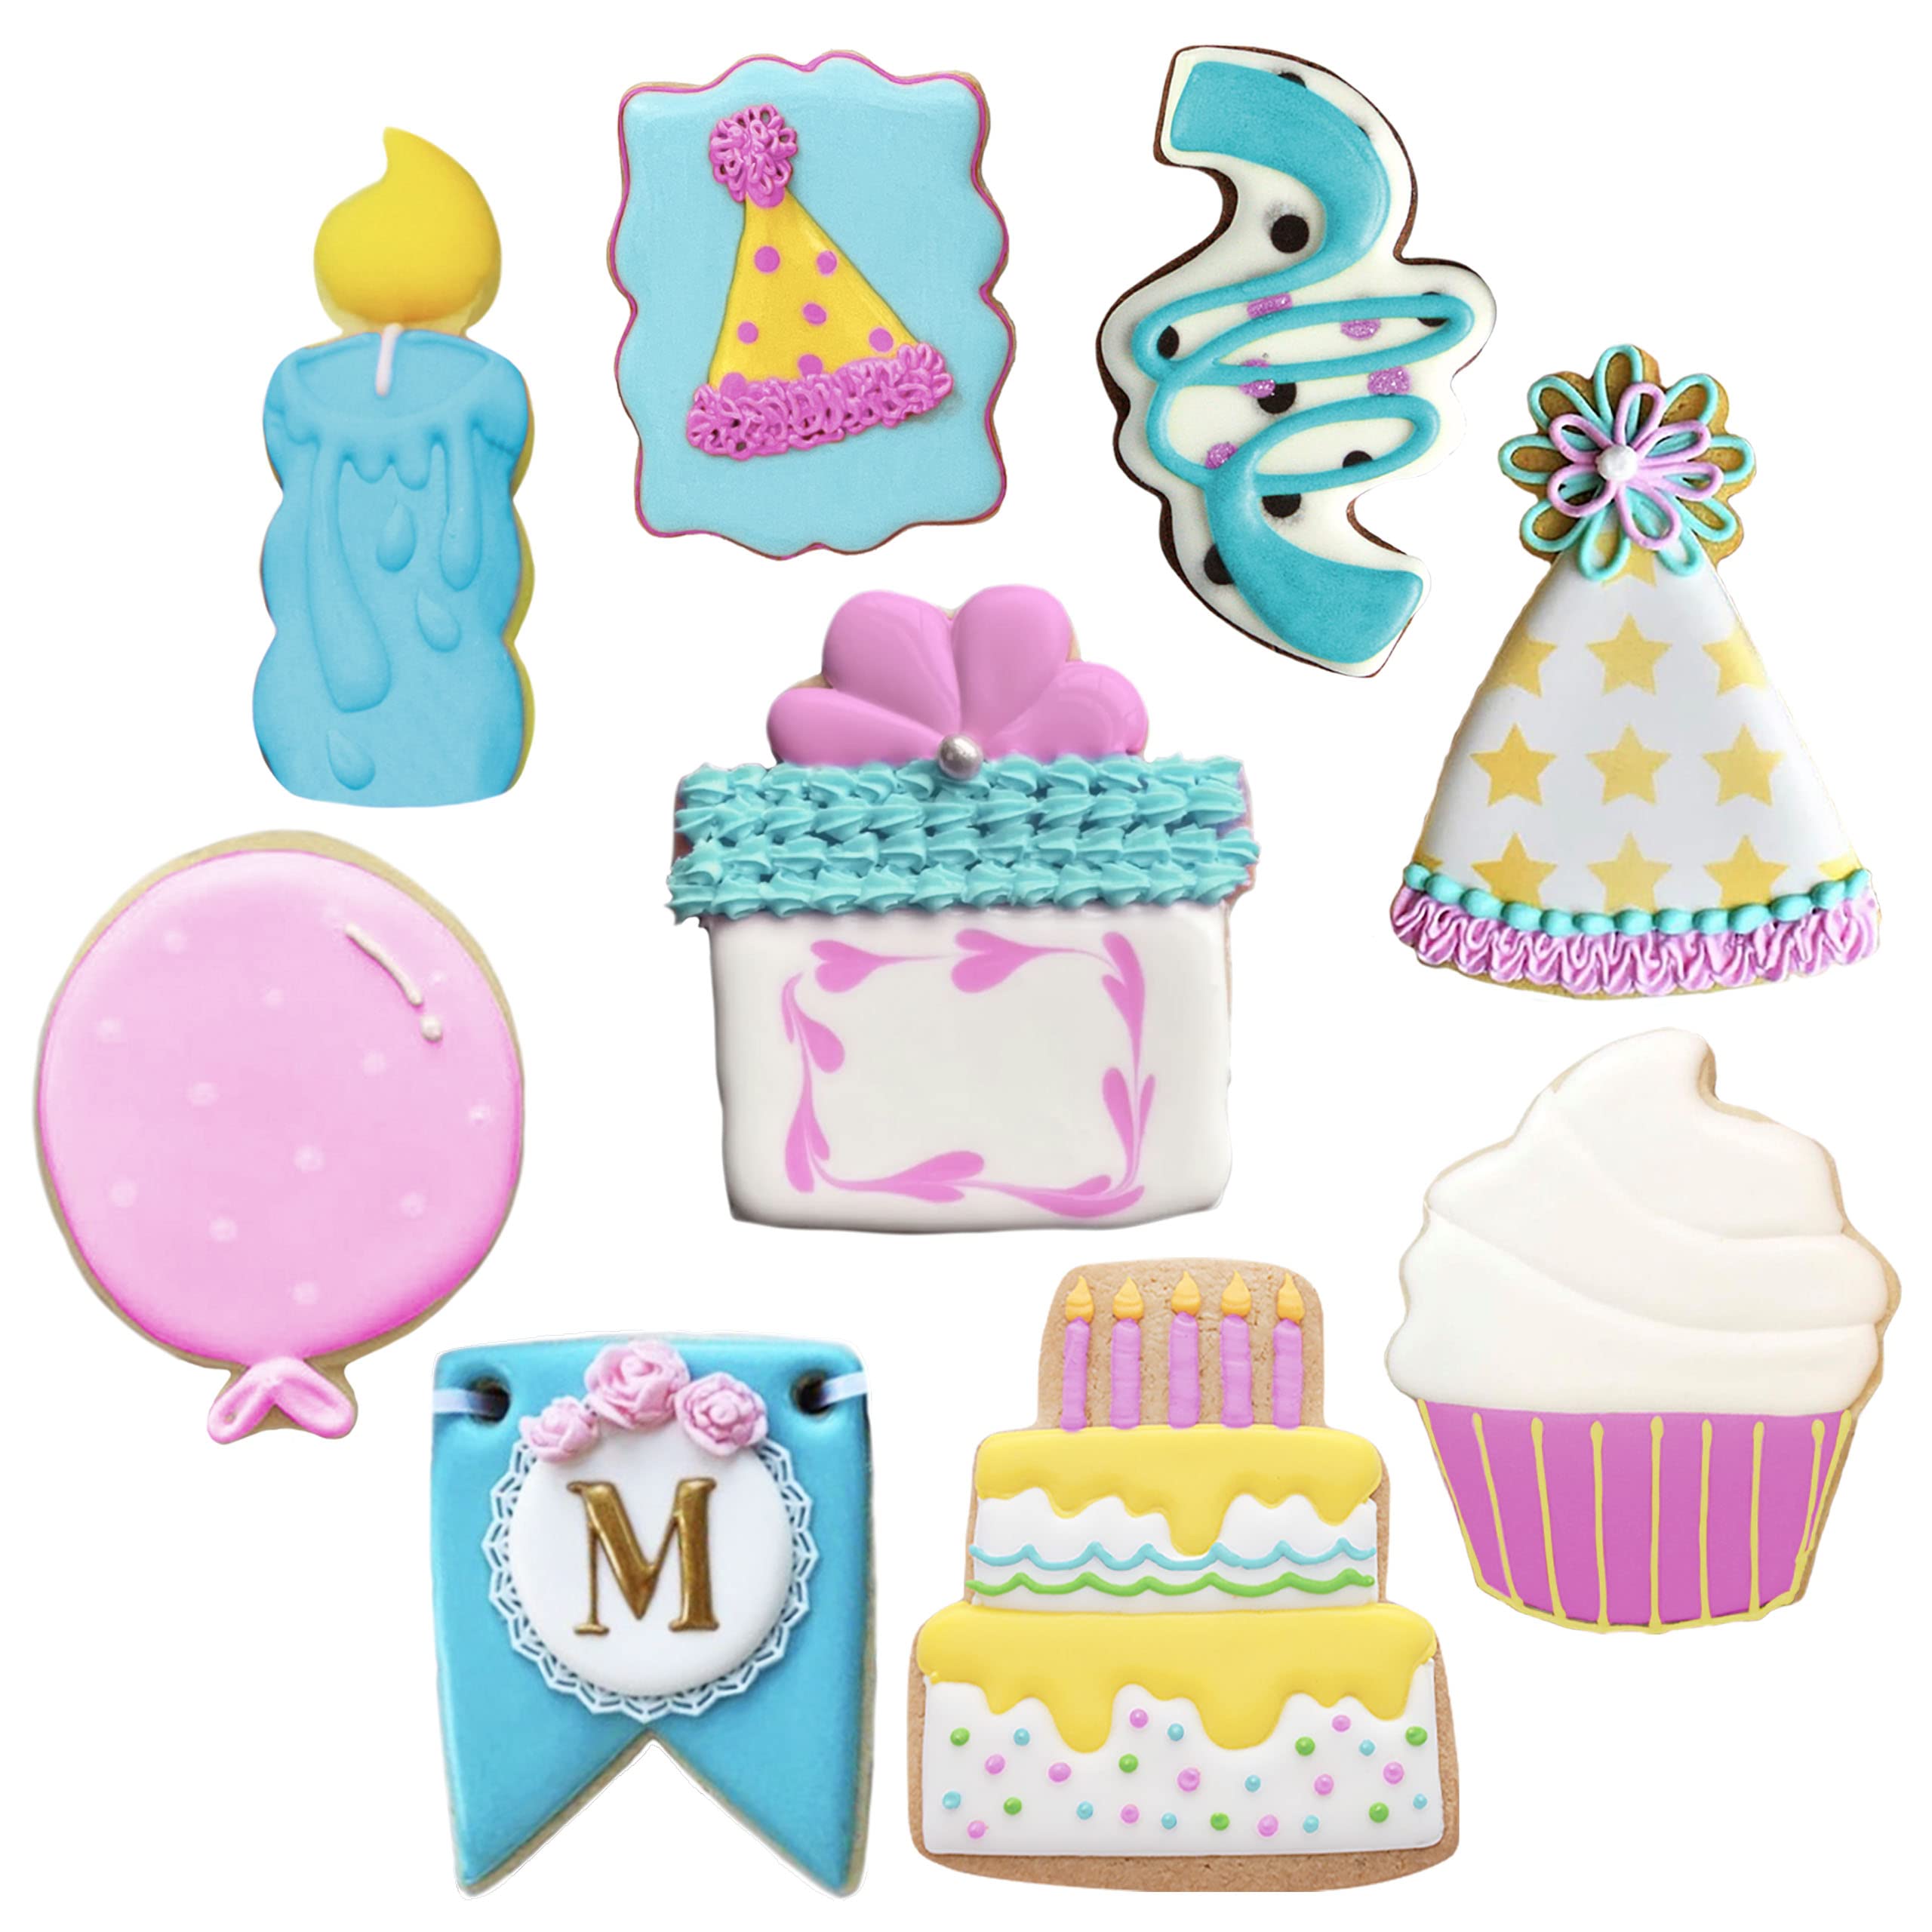 Birthday Cookie Cutters 9-Pc. Set Made in USA by Ann Clark, Cake, Candle, Present, Birthday Hat, Plaque and more